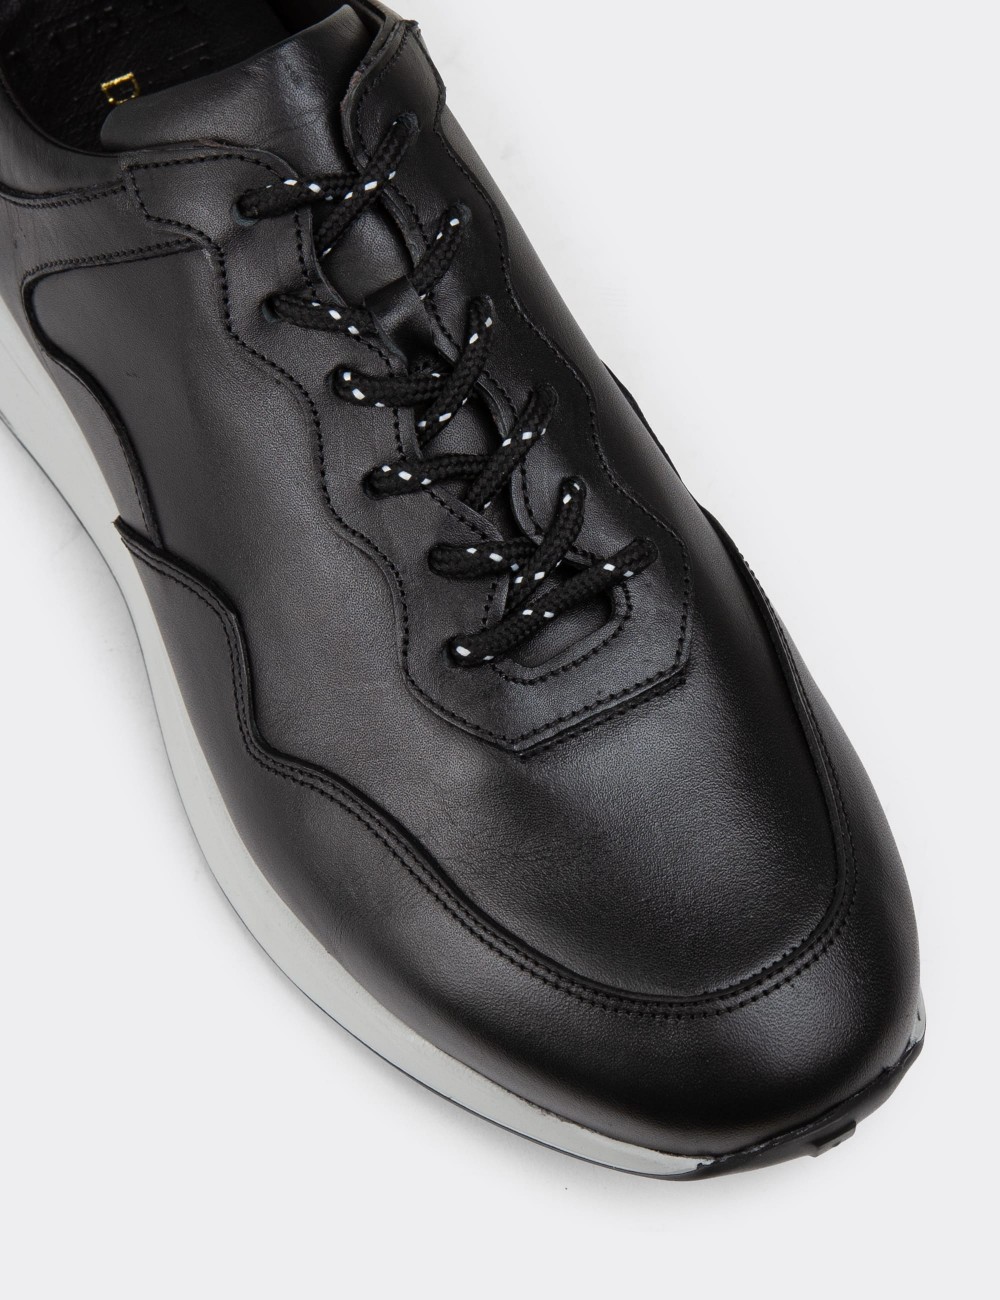 Black Leather Sneakers - 01725MSYHE05